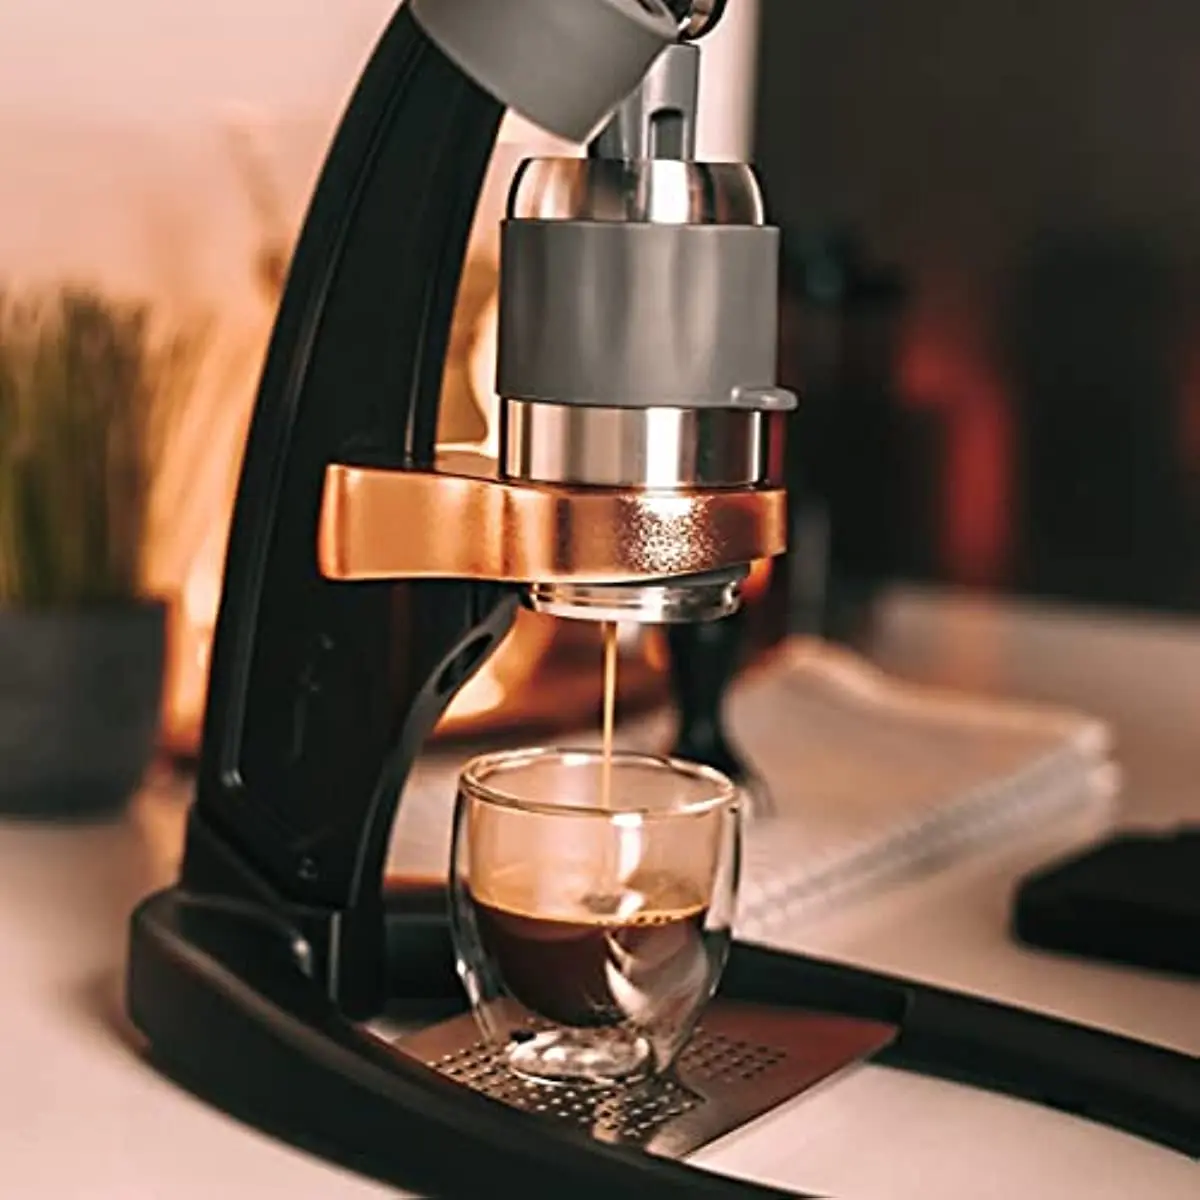 https://ae01.alicdn.com/kf/S59adb6d4460c4c4ba2fa628043329c058/Original-Flair-Espresso-Maker-PRO-2-An-All-Manual-Lever-Espresso-Maker-with-Stainless-Steel-Brew.jpg